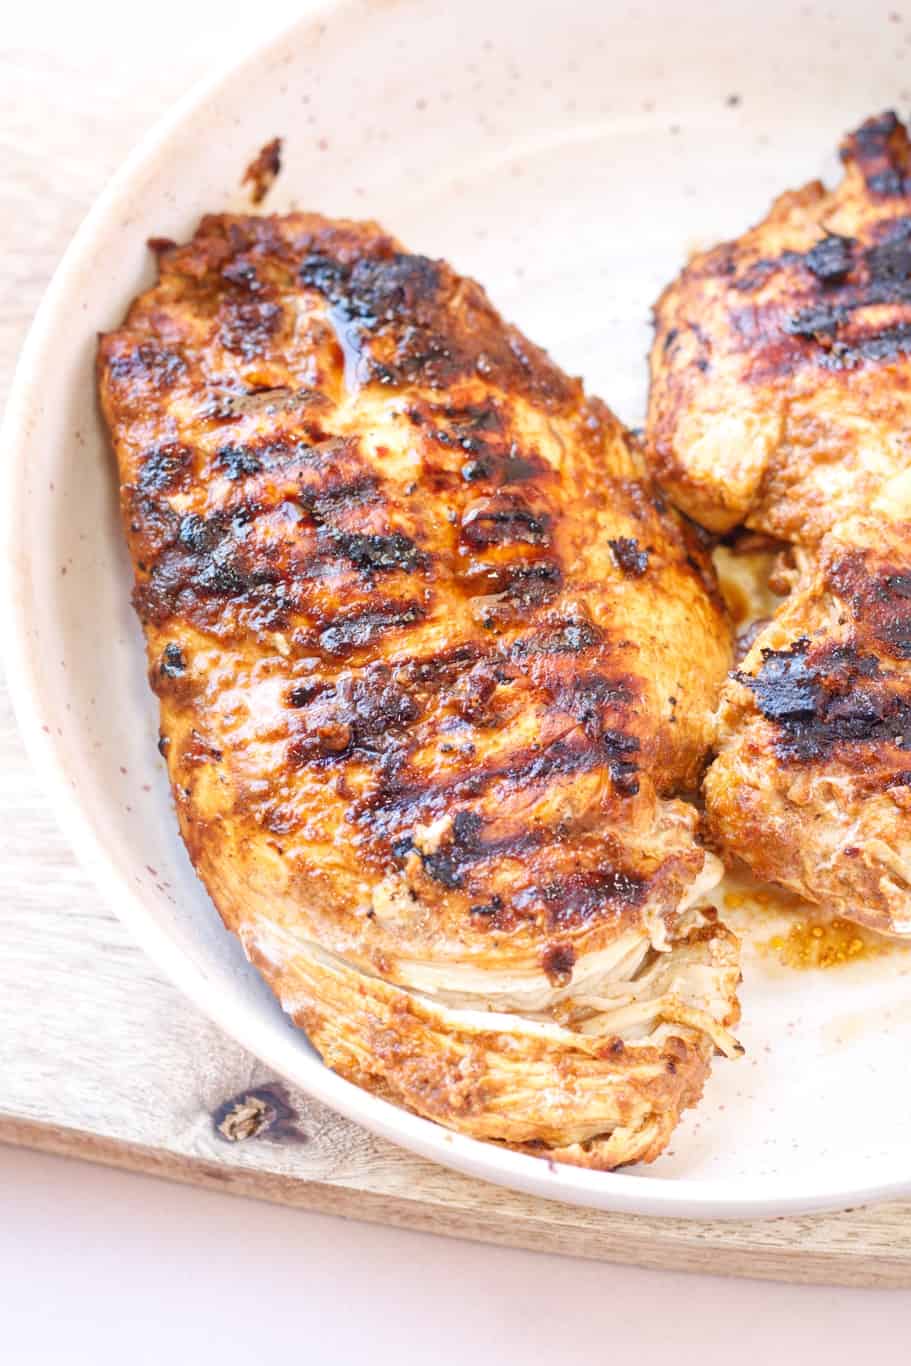 Tender chicken packed with flavor from a chipotle based marinade with lime and orange juice